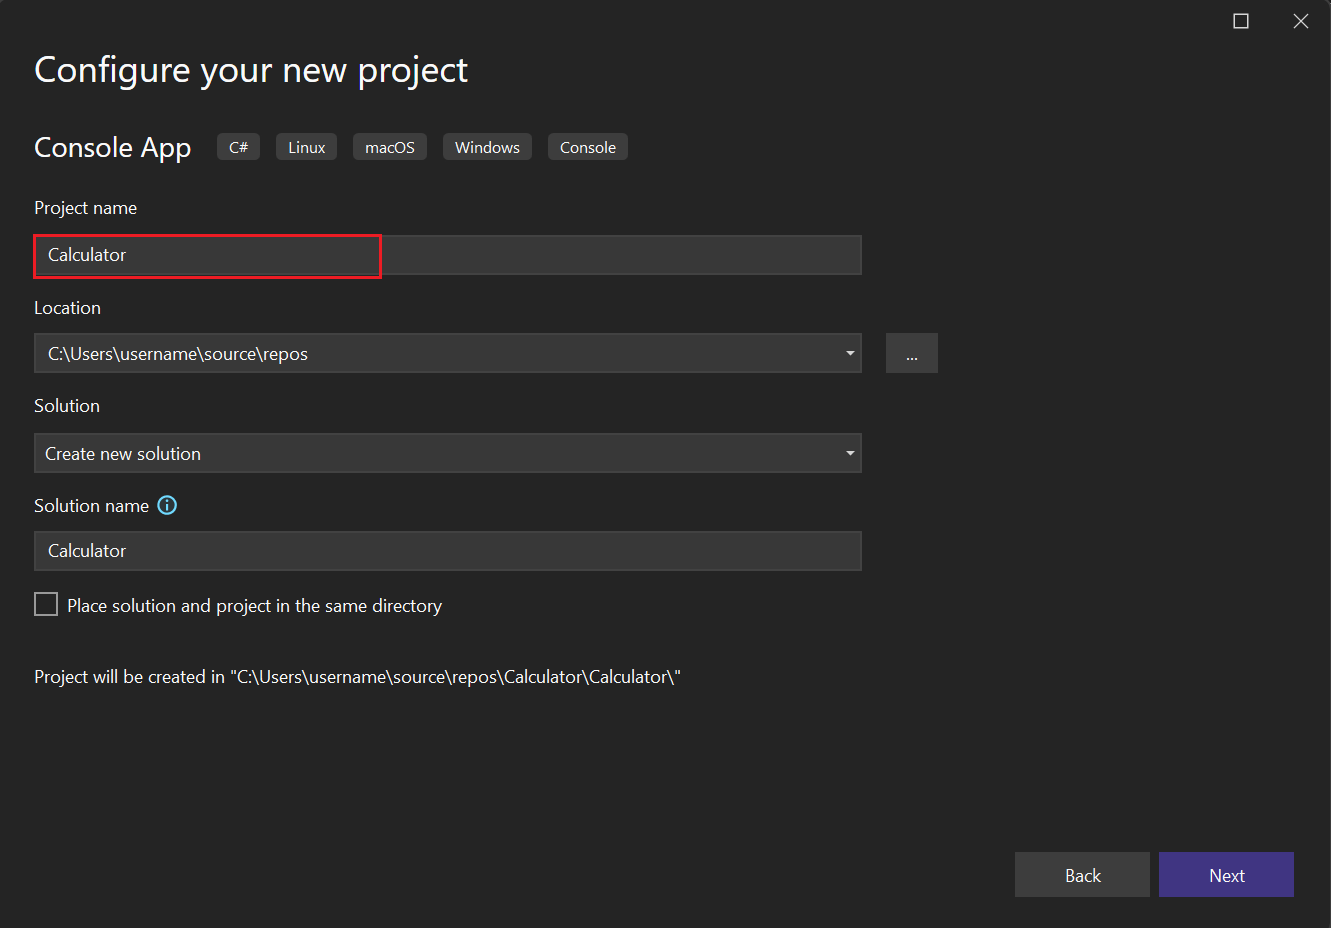 Screenshot that shows how to name your project 'Calculator' in the 'Configure your new project' window in Visual Studio.